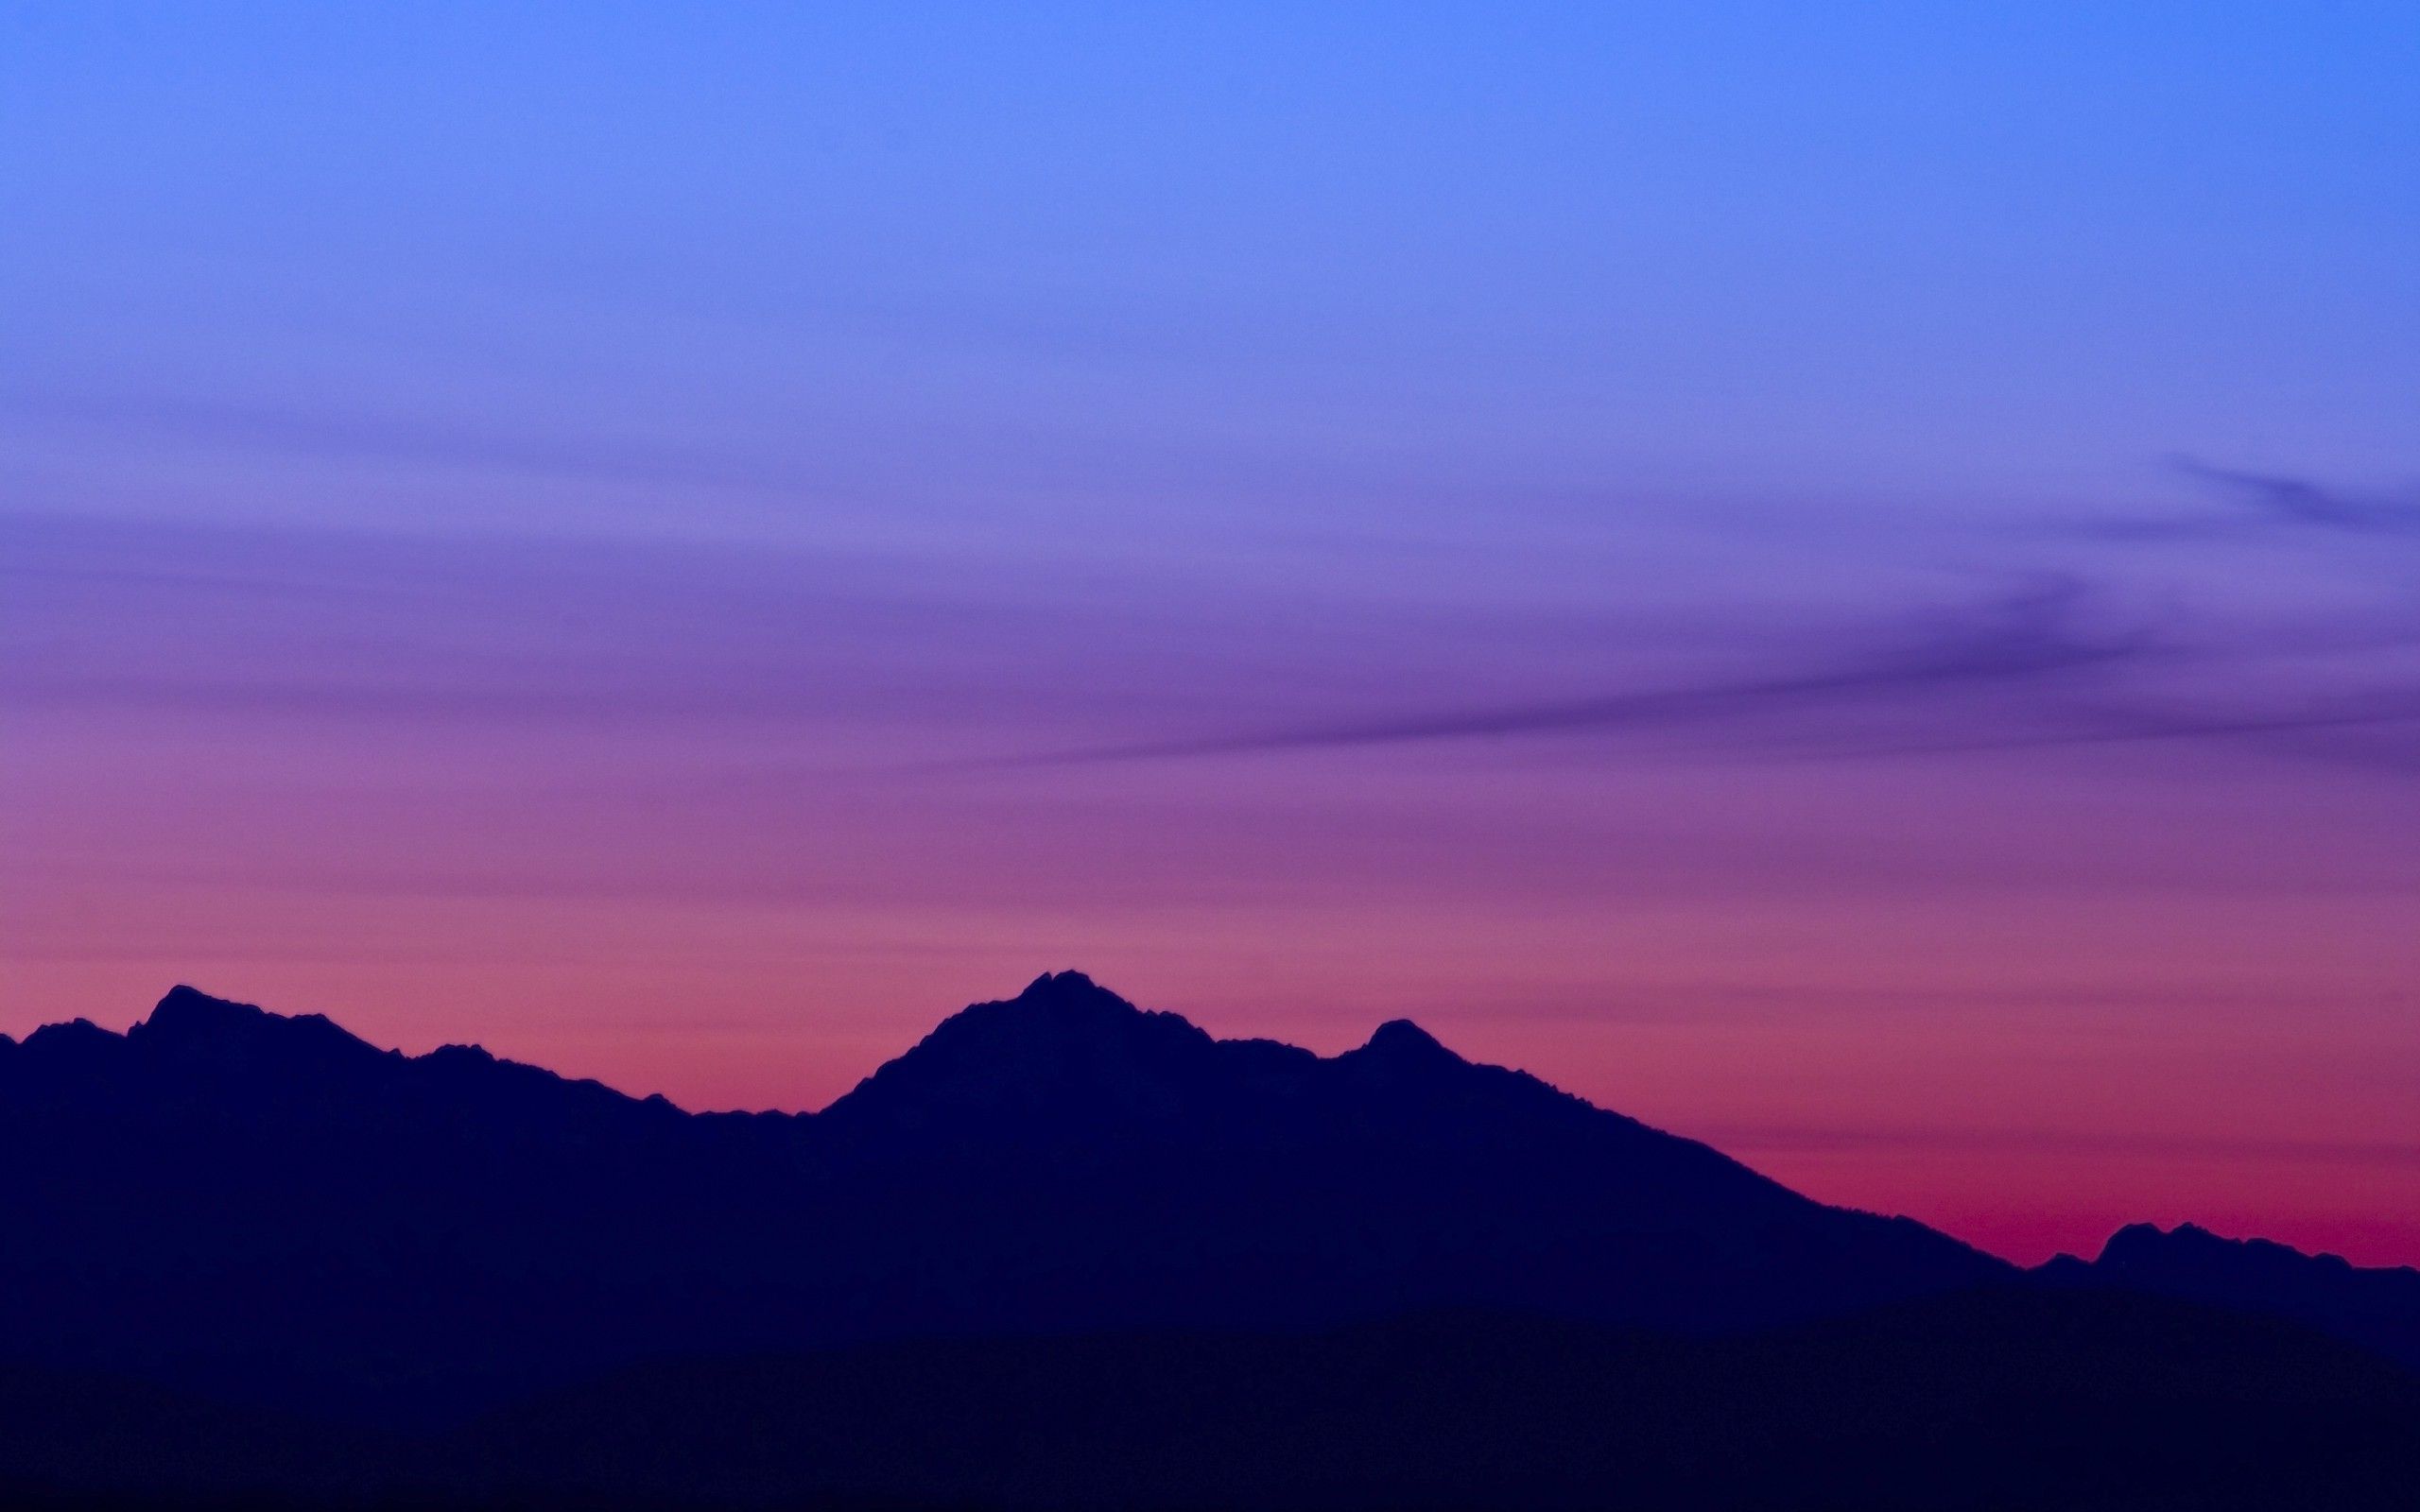 A sunset with mountains in the background - Mountain, landscape